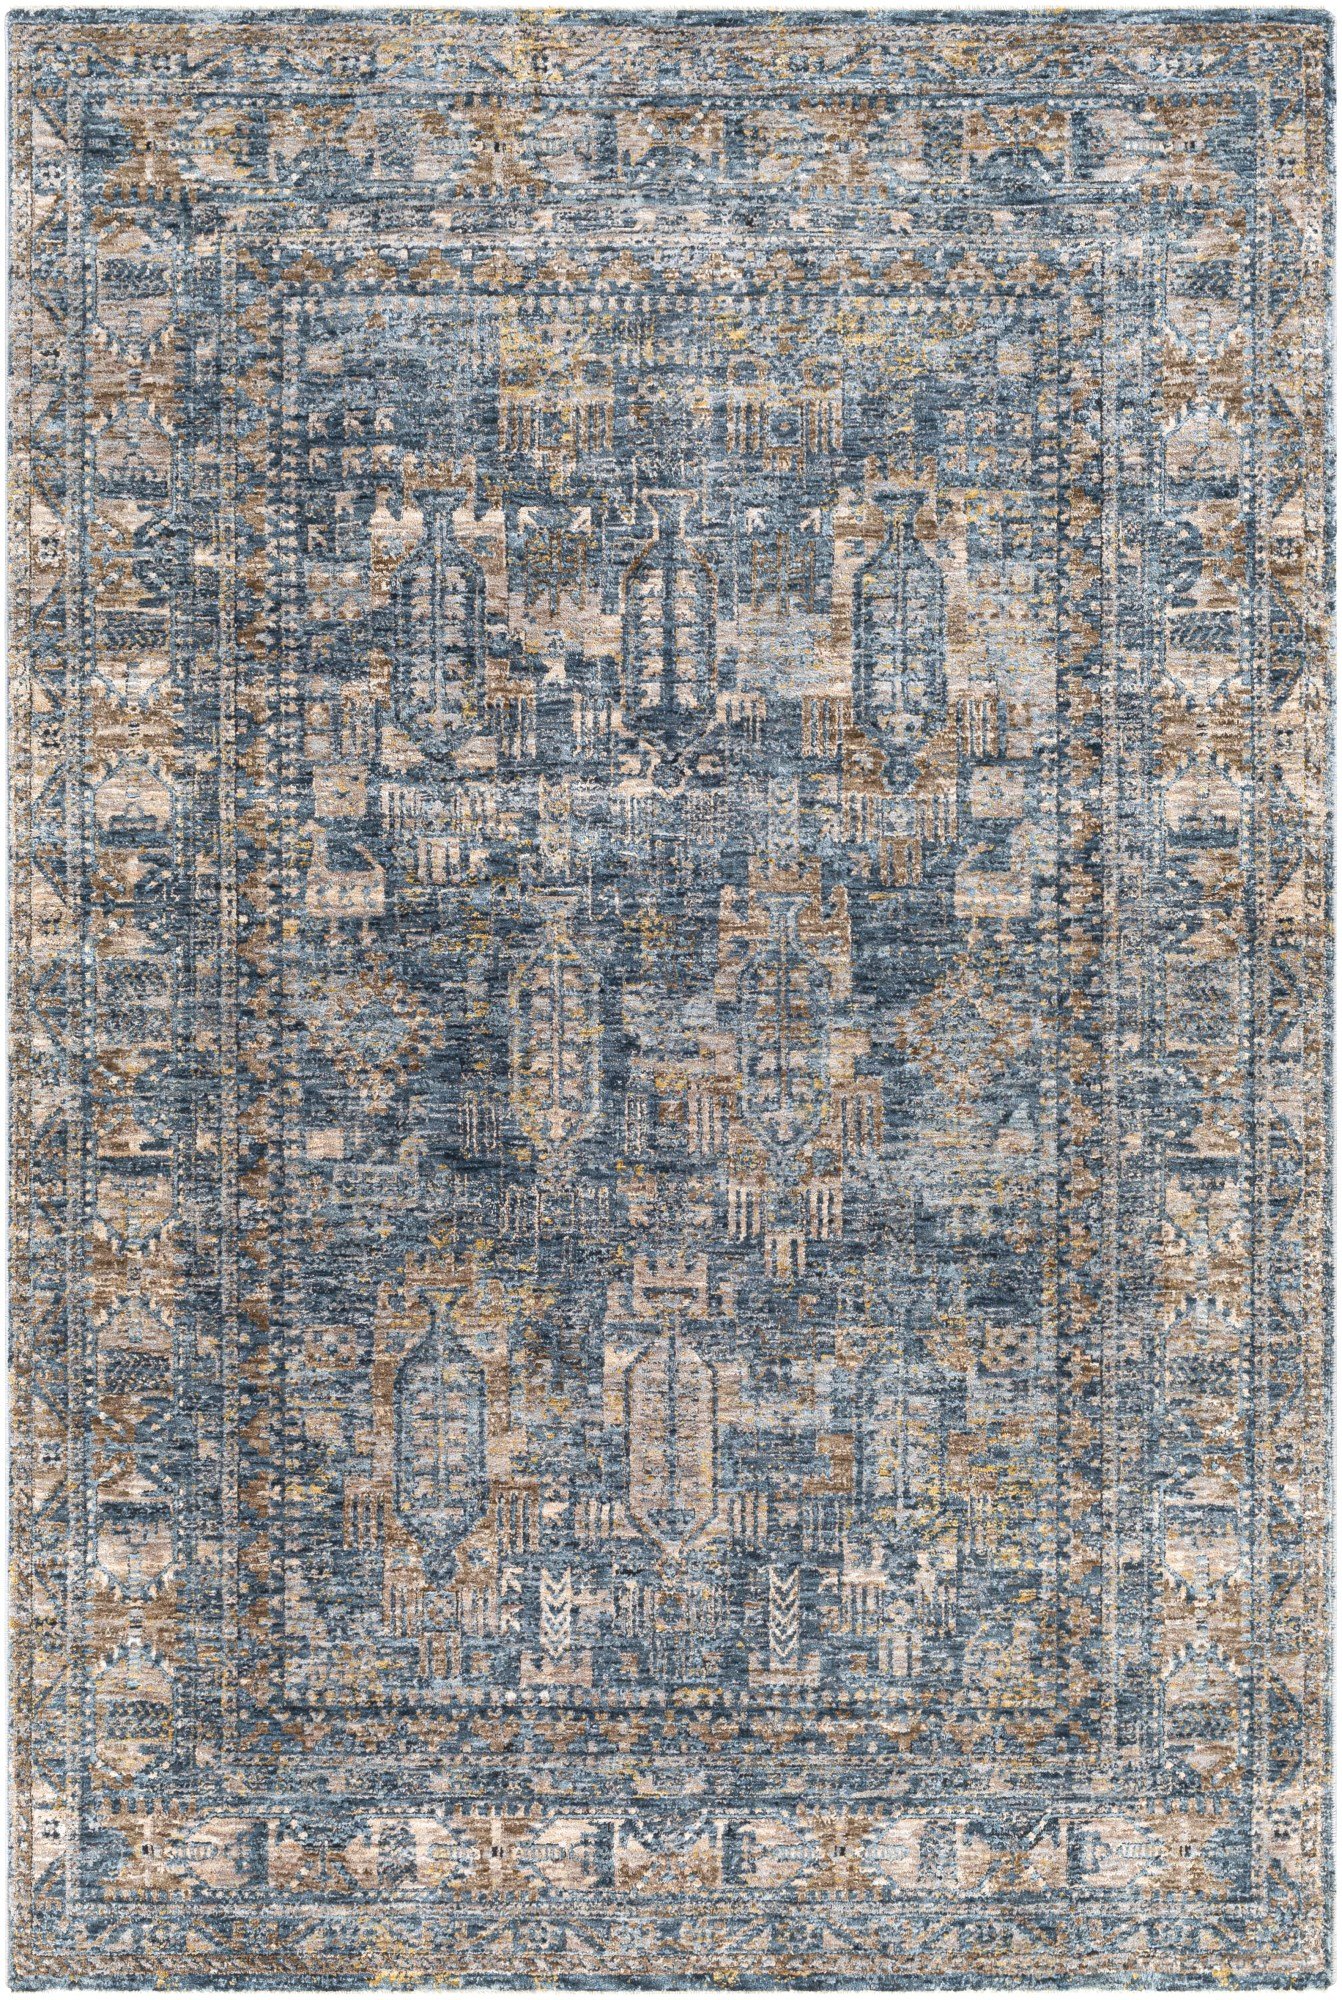 Blue Area Rugs Direct, Navy Blue And Cream Area Rugs